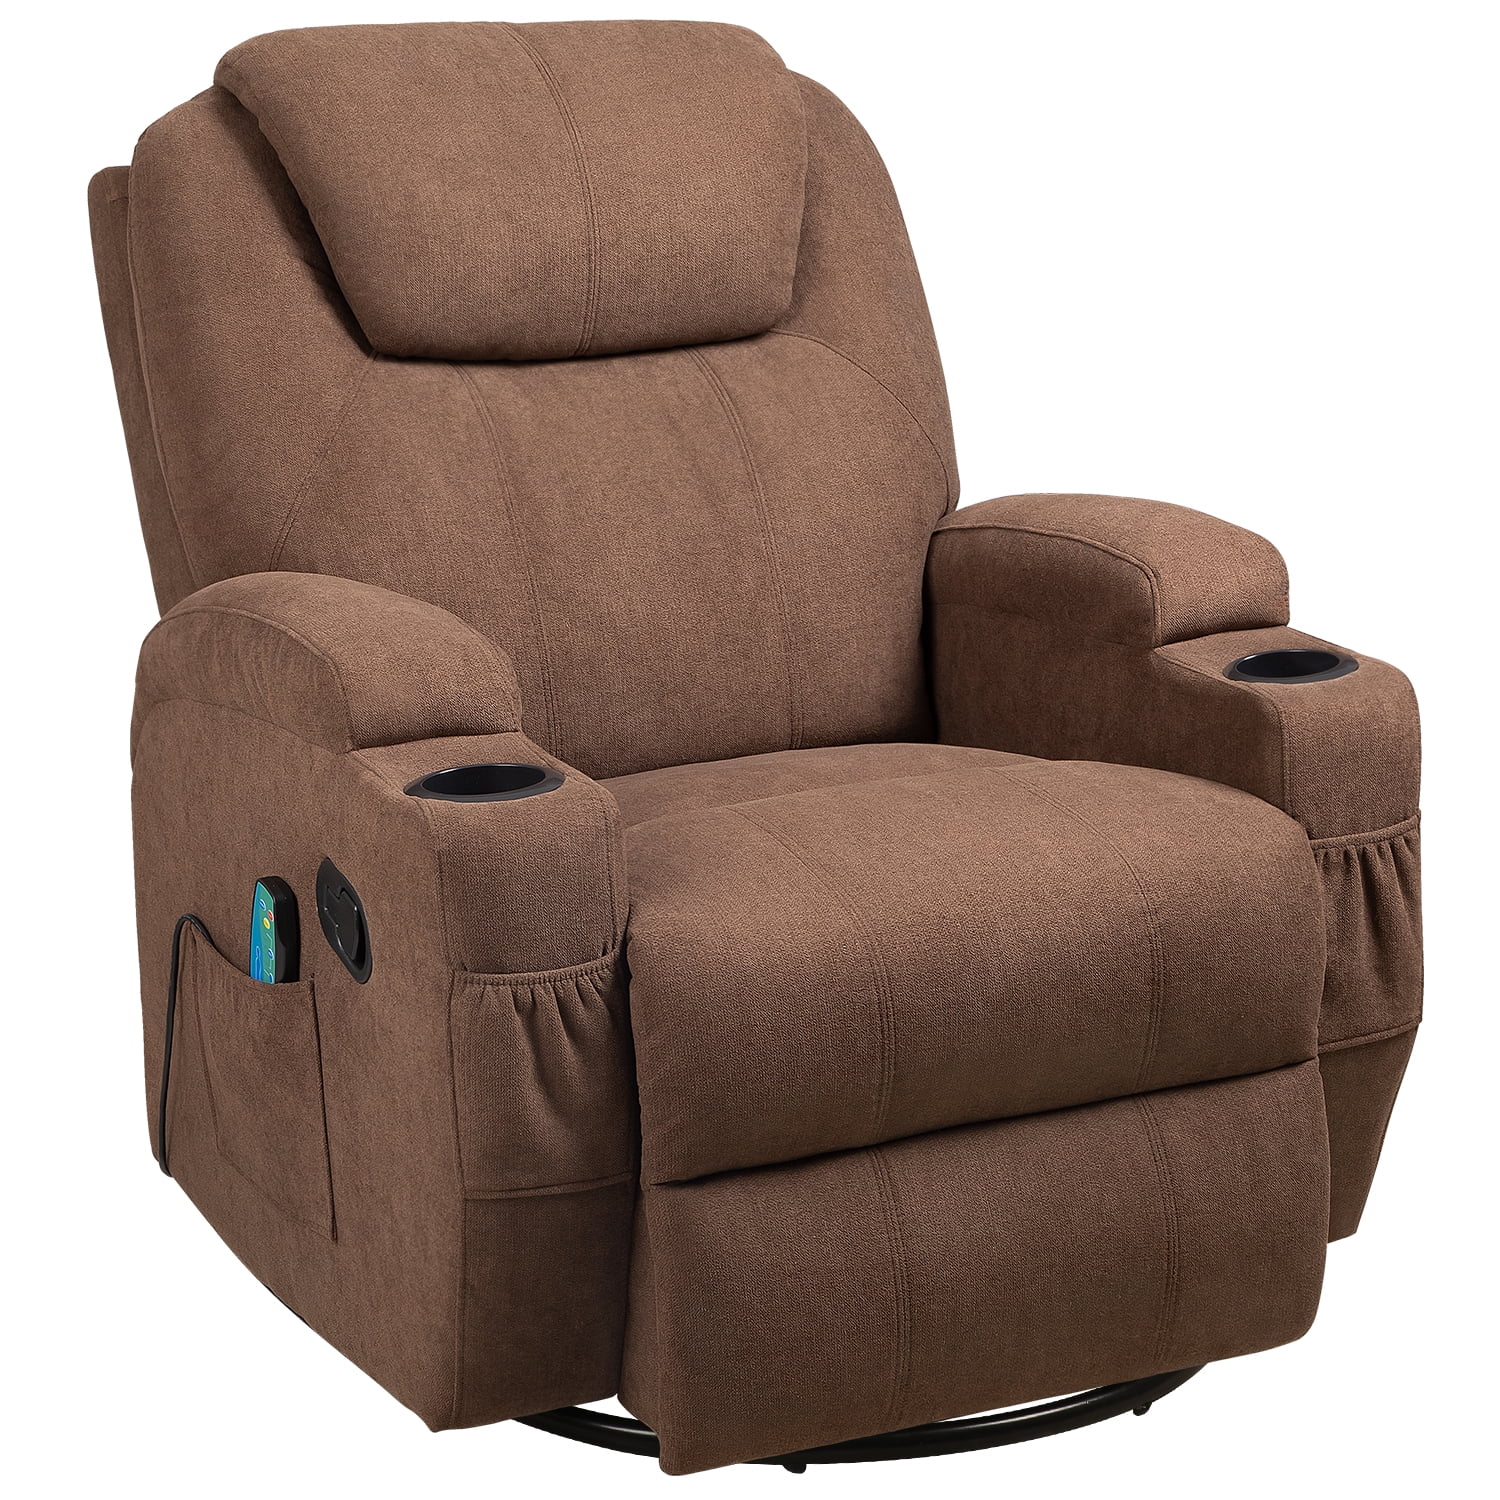 Lacoo Swivel Rocker Recliner with Massage and Heat, Brown Fabric